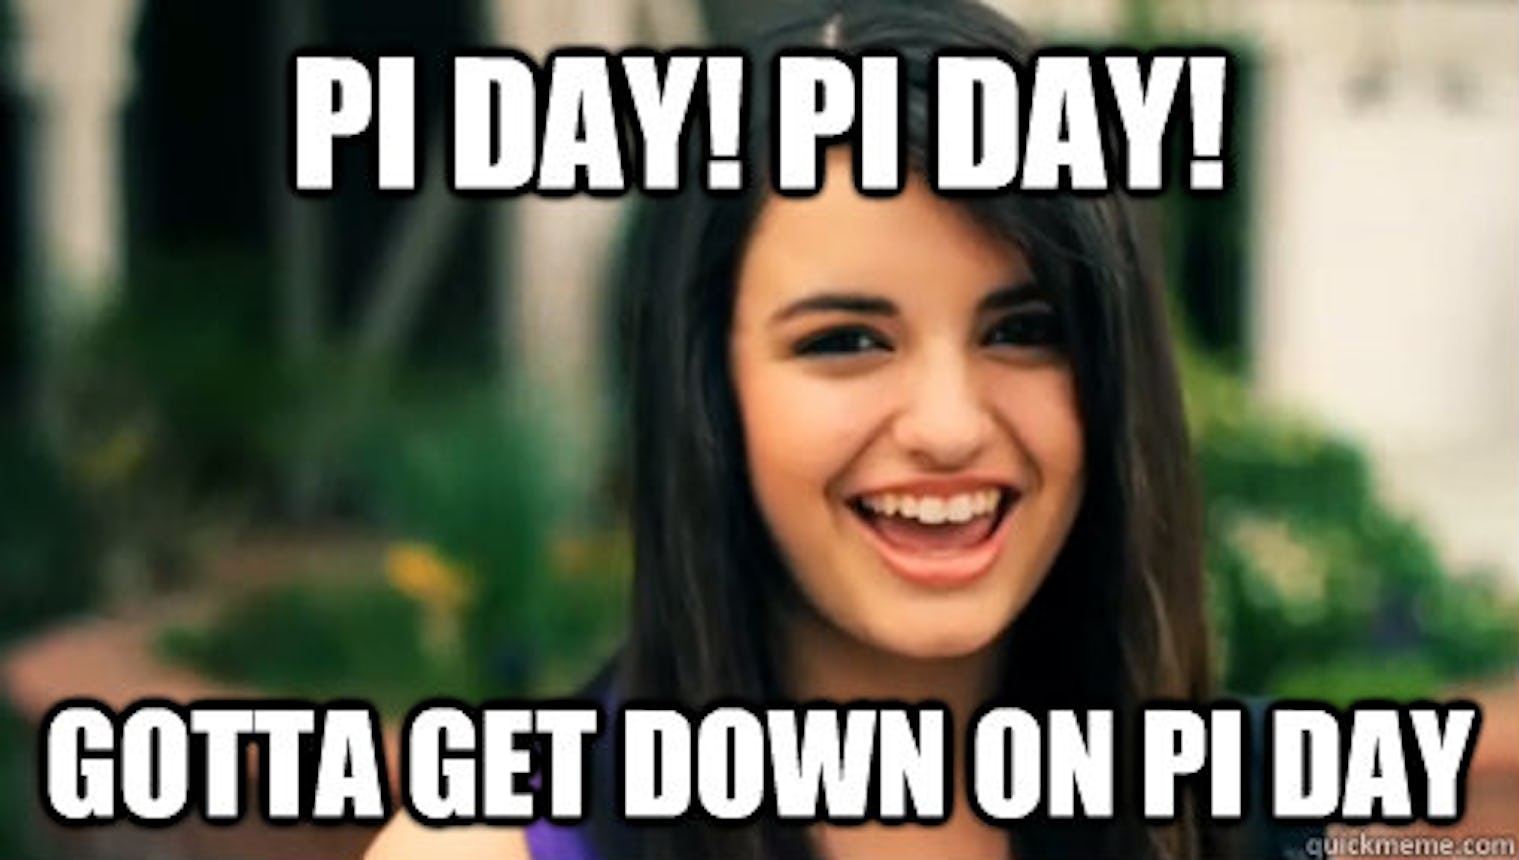 10 National Pi Day Memes And S For Nerds And Foodies Alike